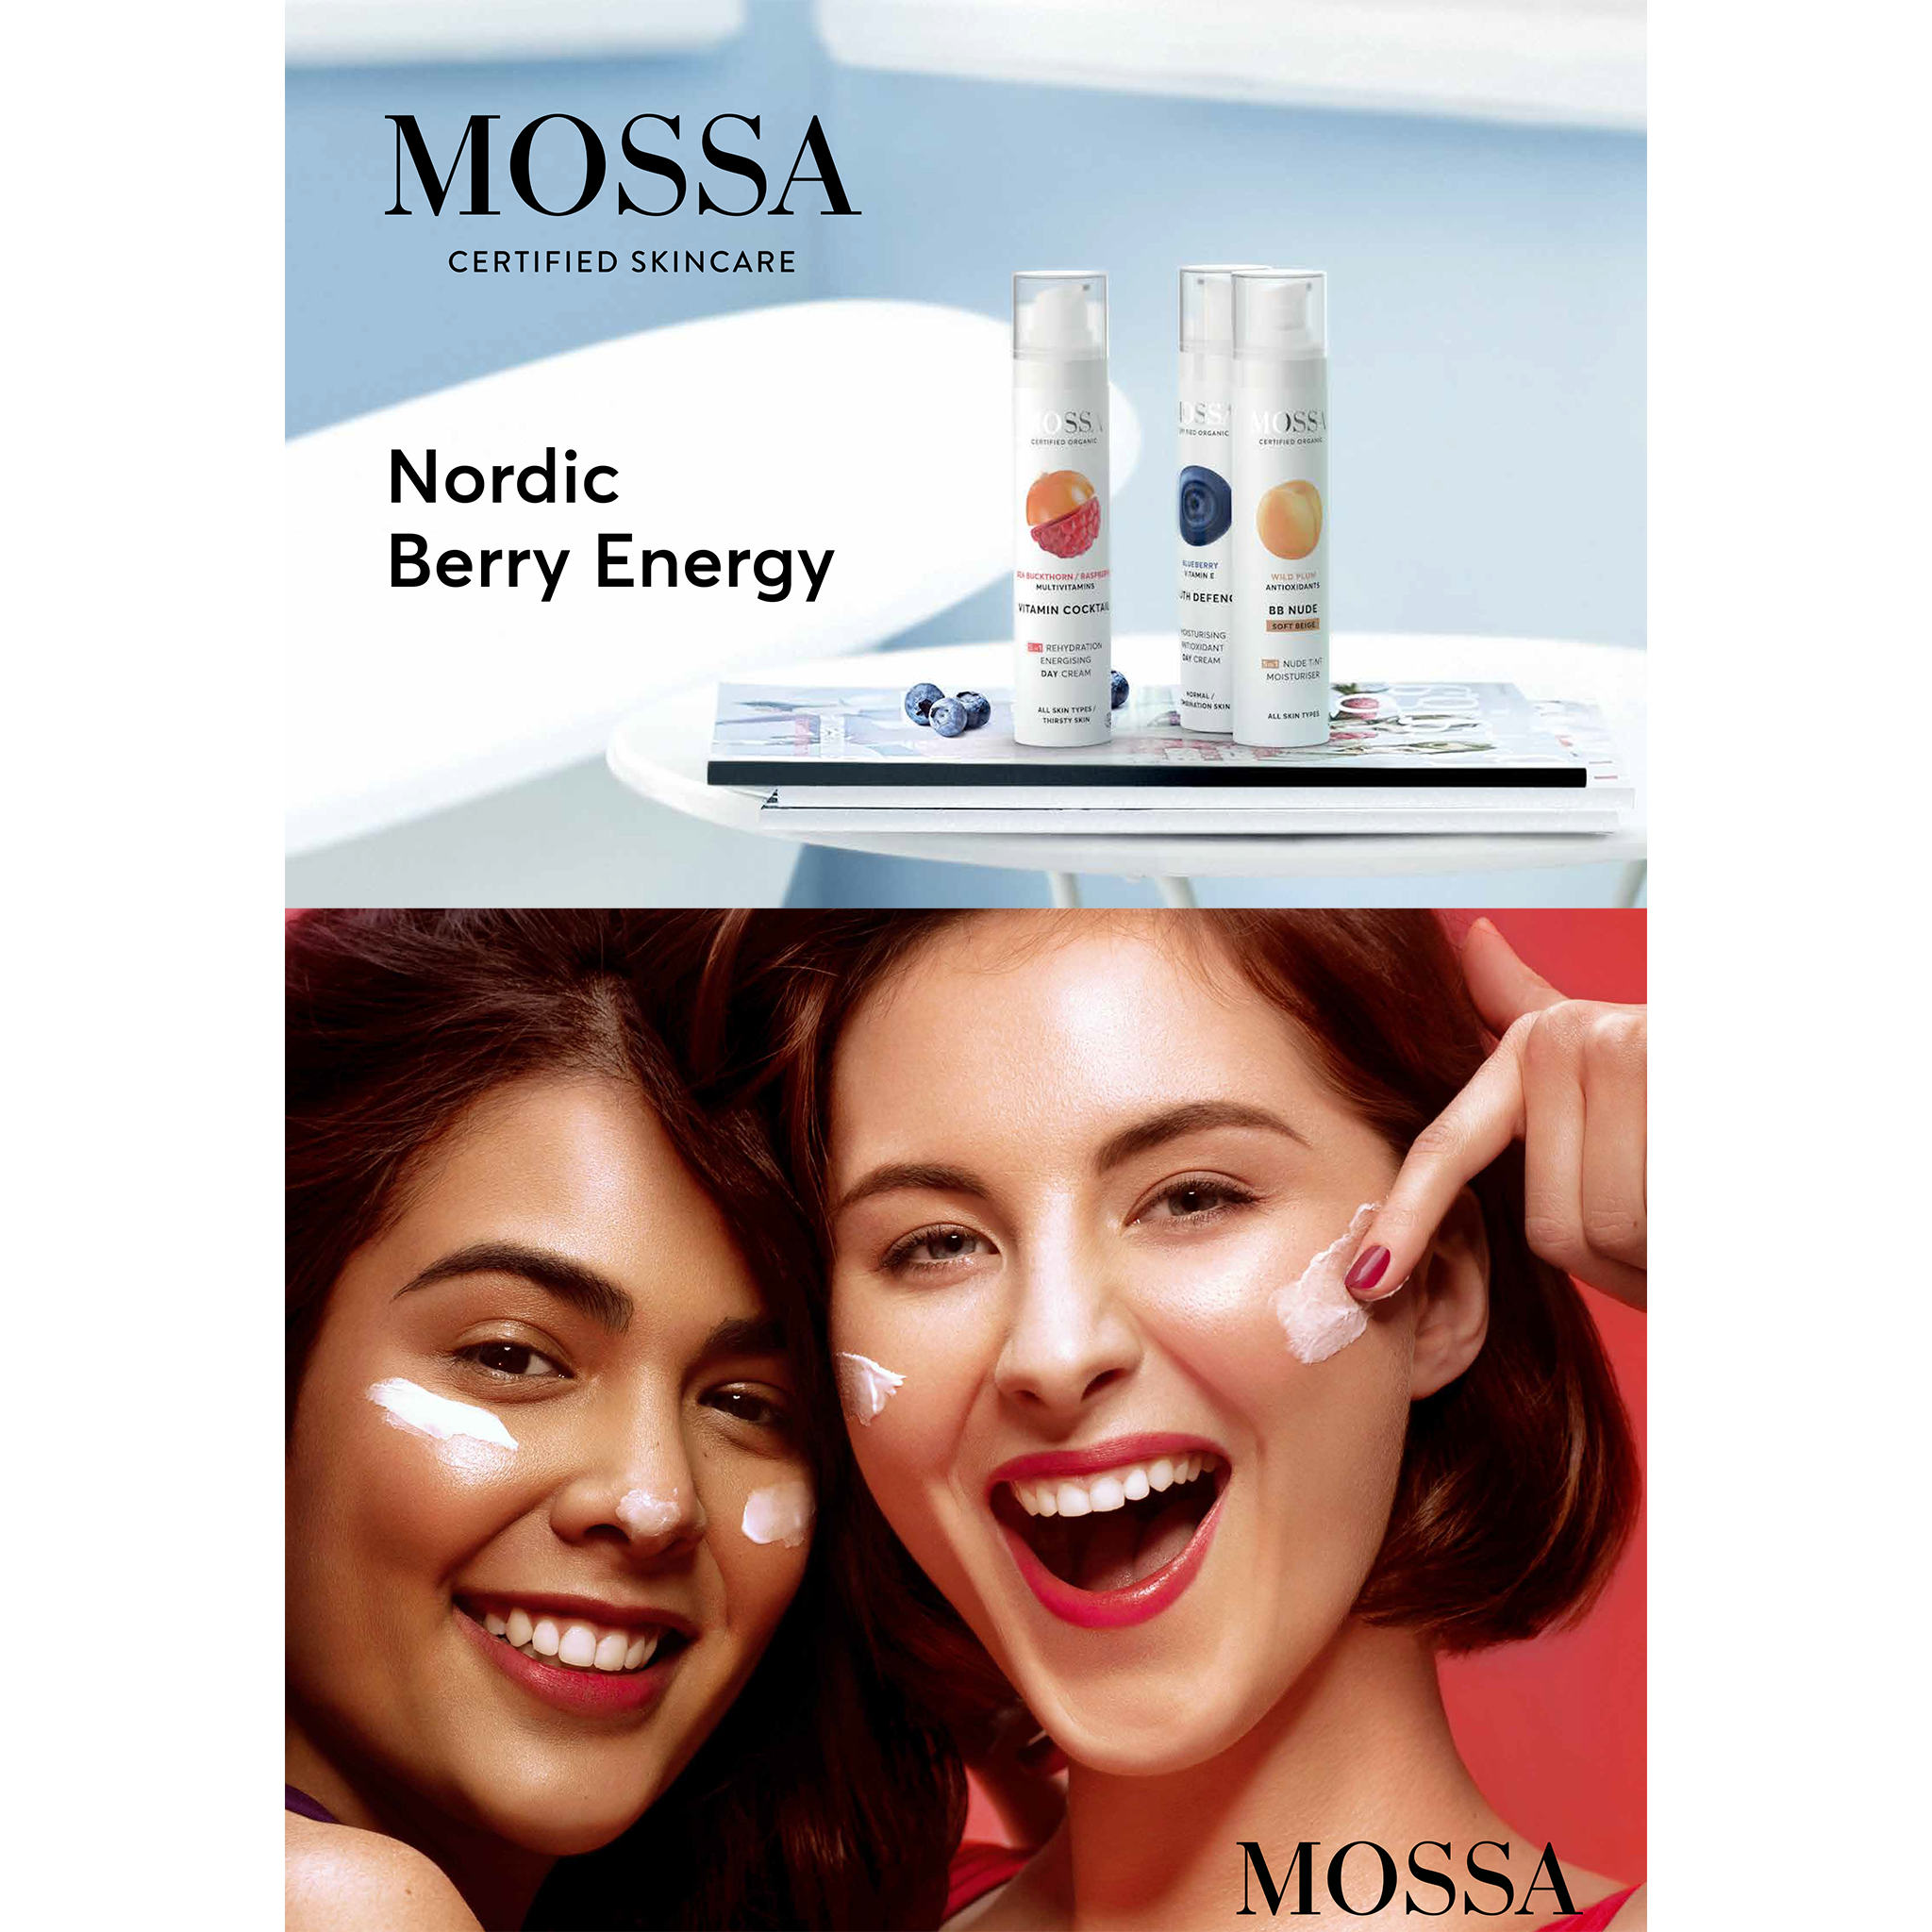 MOSSA Variety Sample Sachet Pack - Free with £60 Spend